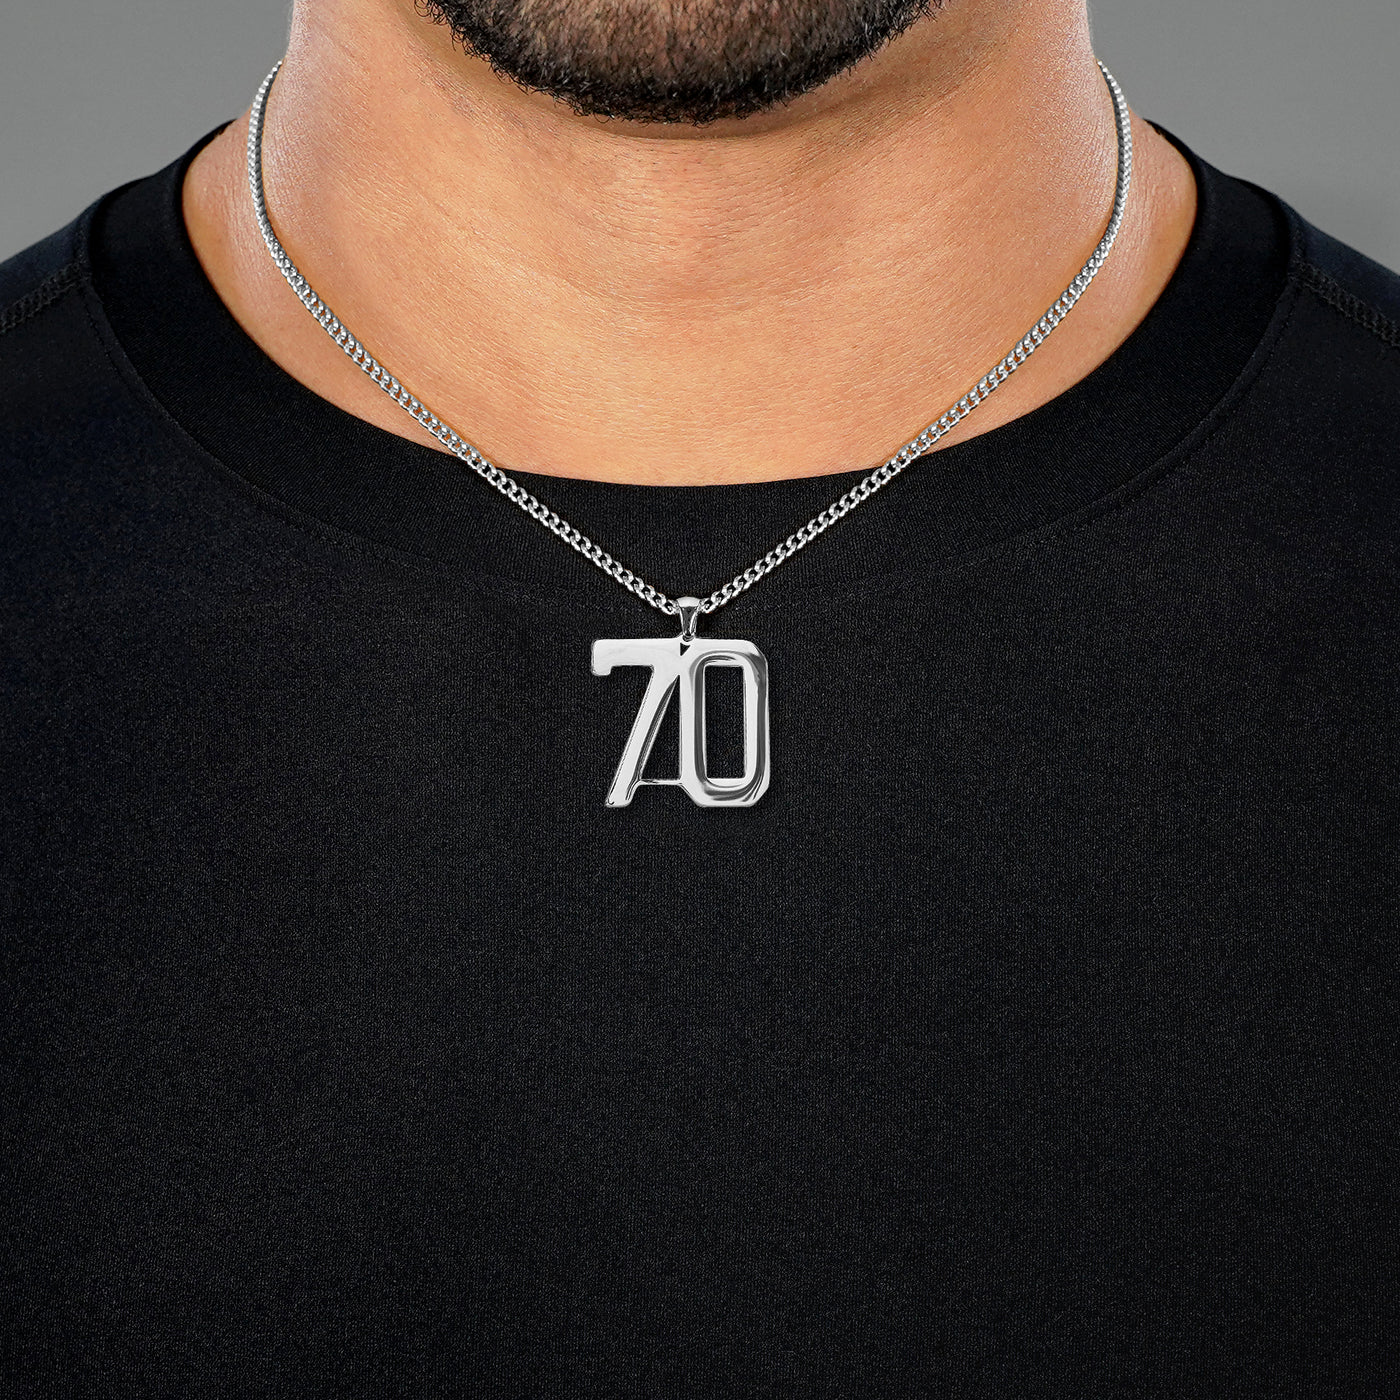 70 Number Pendant with Chain Necklace - Stainless Steel